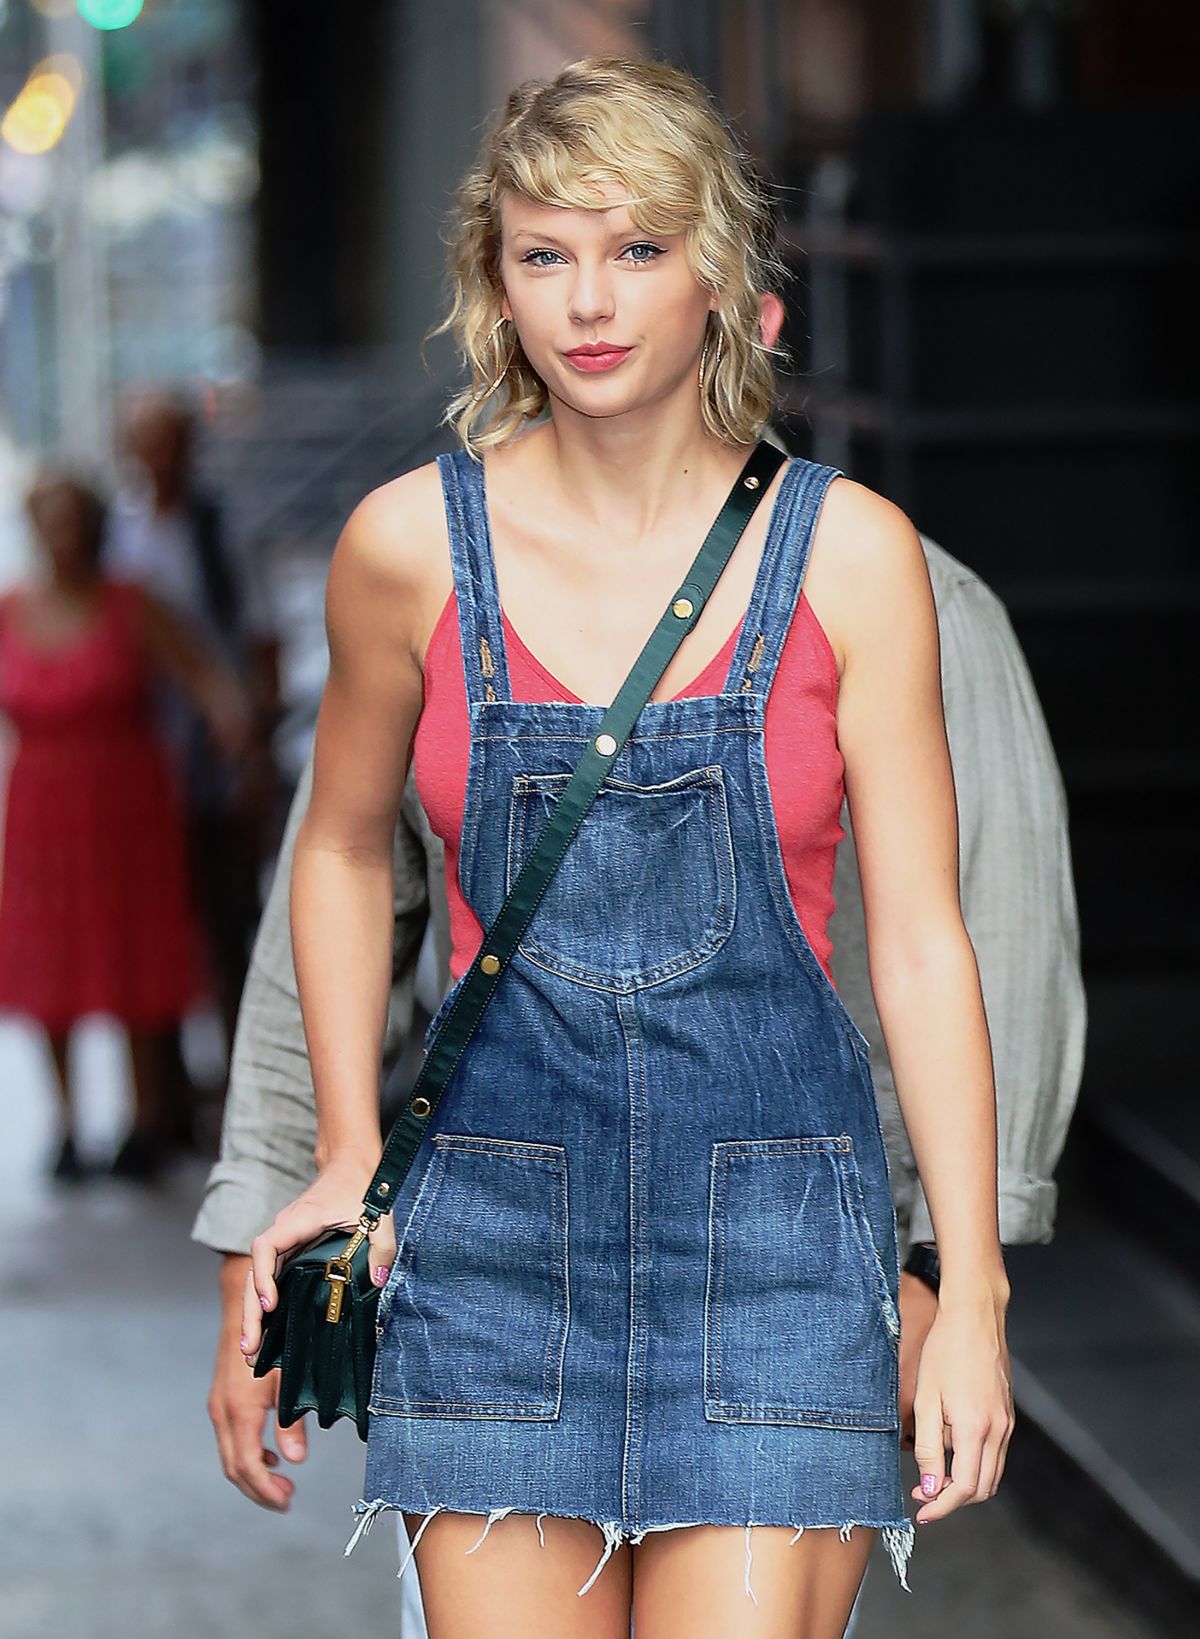 Taylor swift in overalls